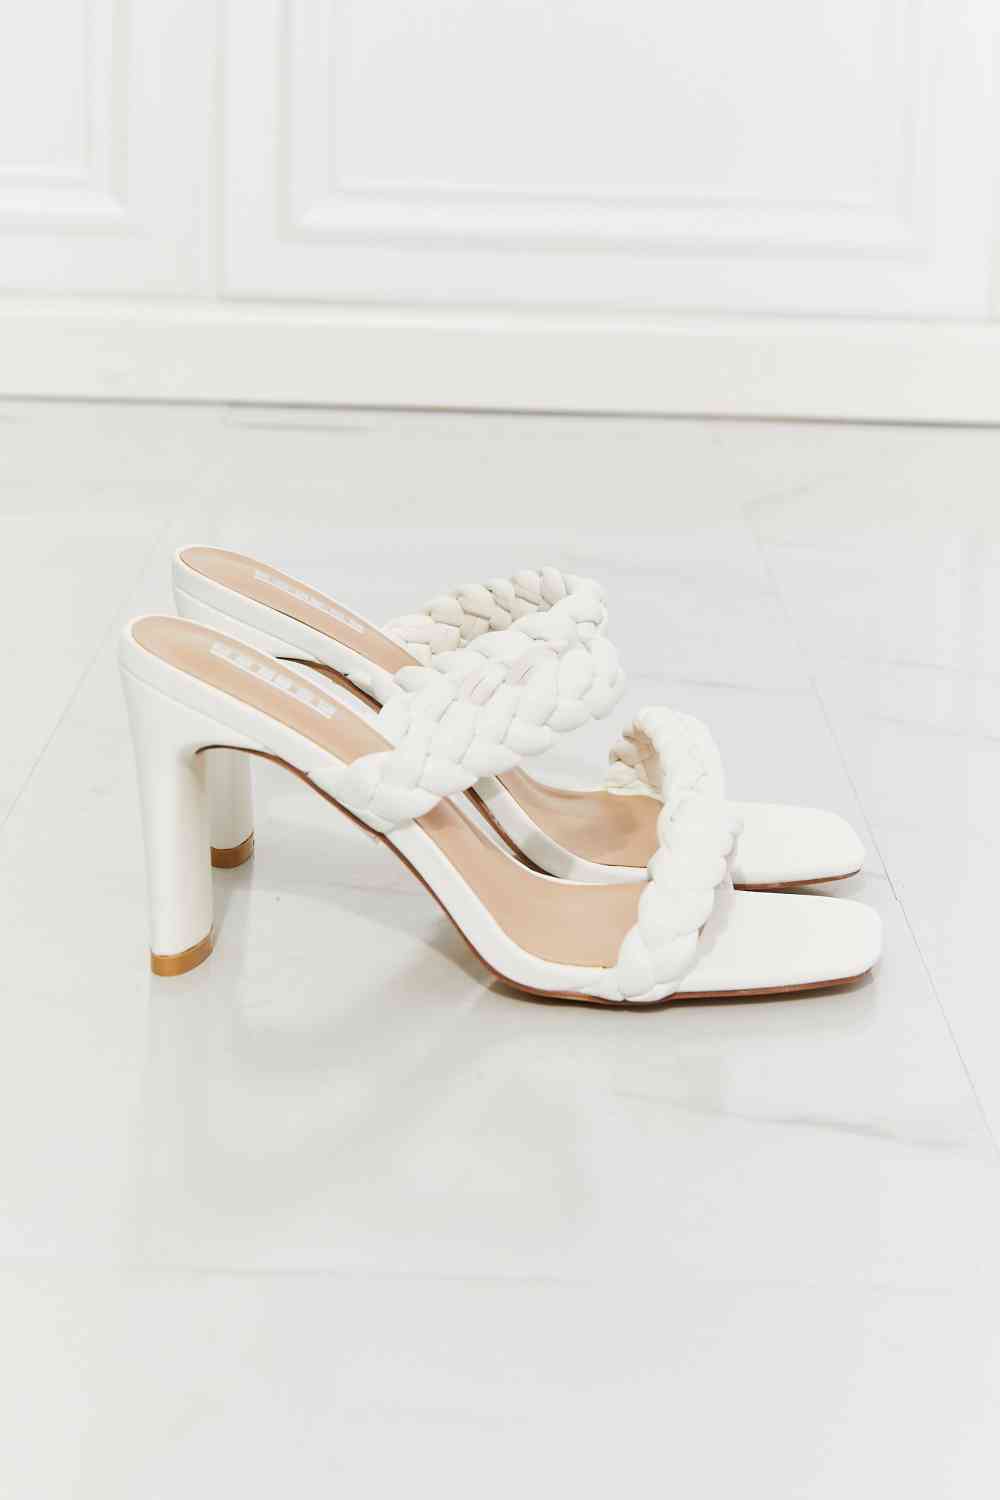 MMShoes In Love Double Braided Block Heel Sandal in White - SELFTRITSS